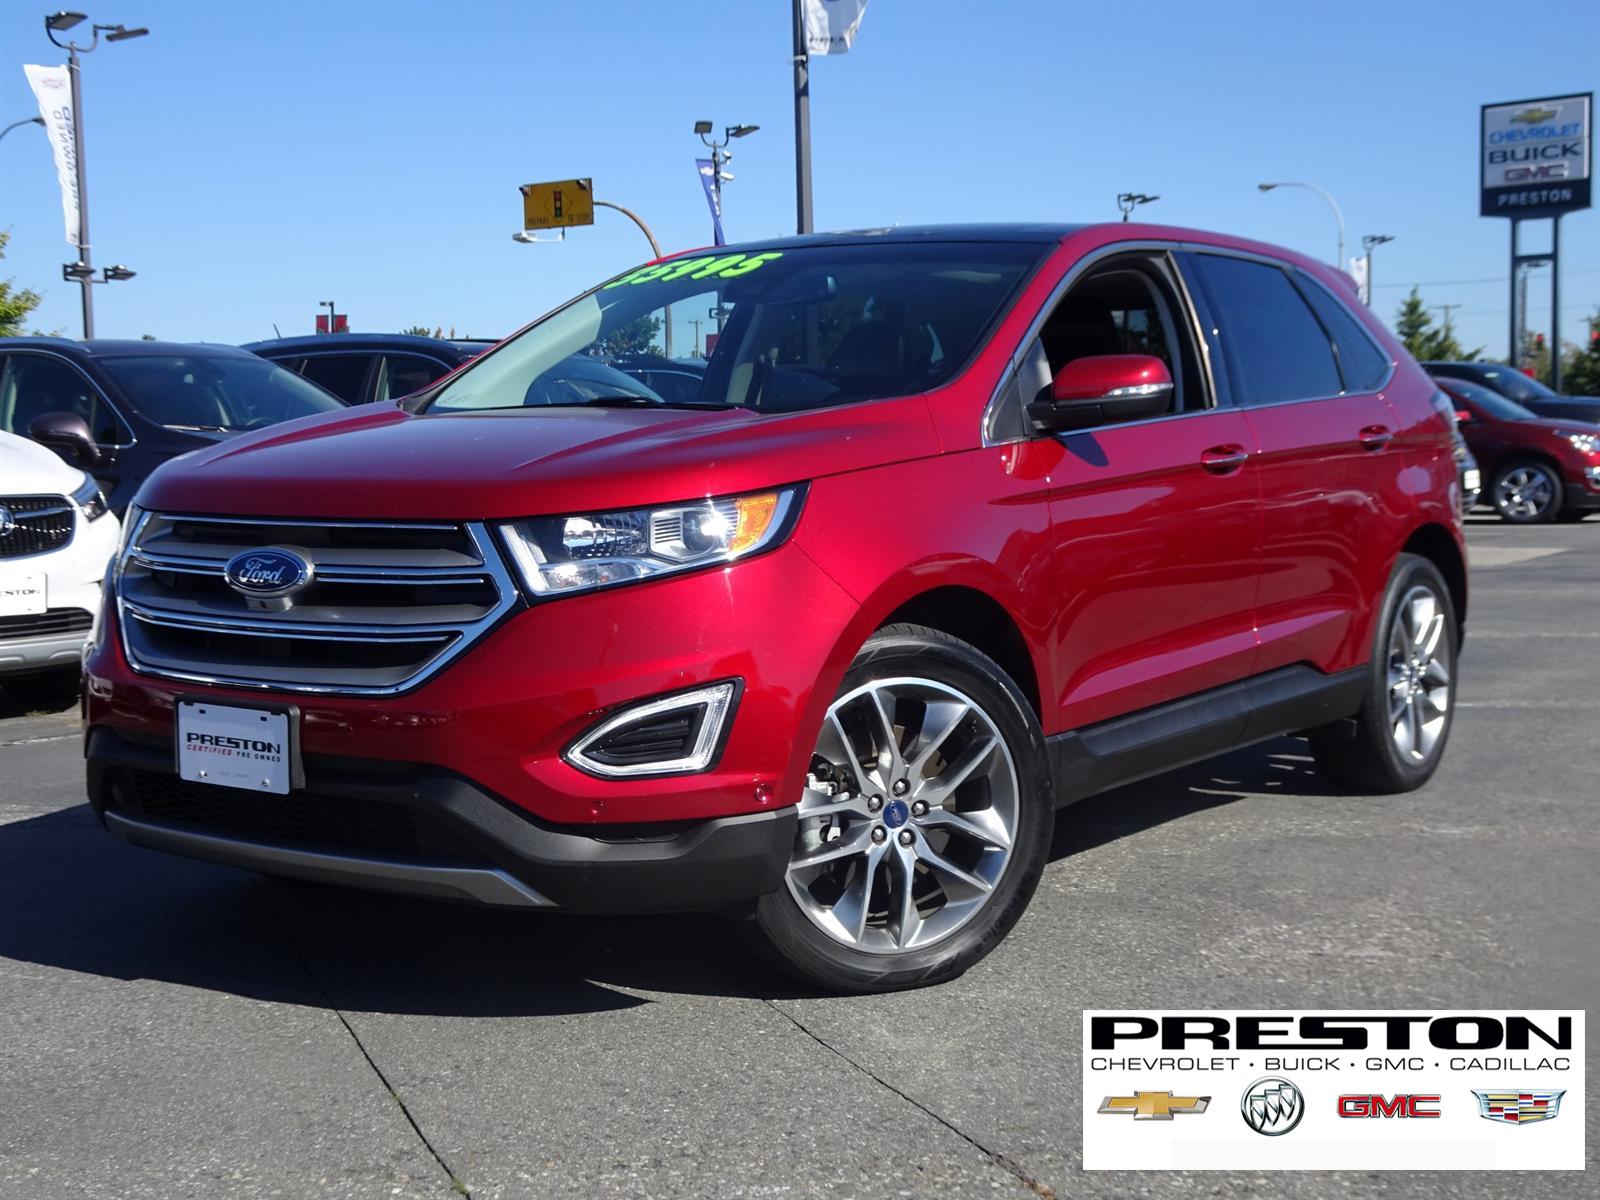 2015 Ford Edge for sale. Great deals on 2015 Ford Edge